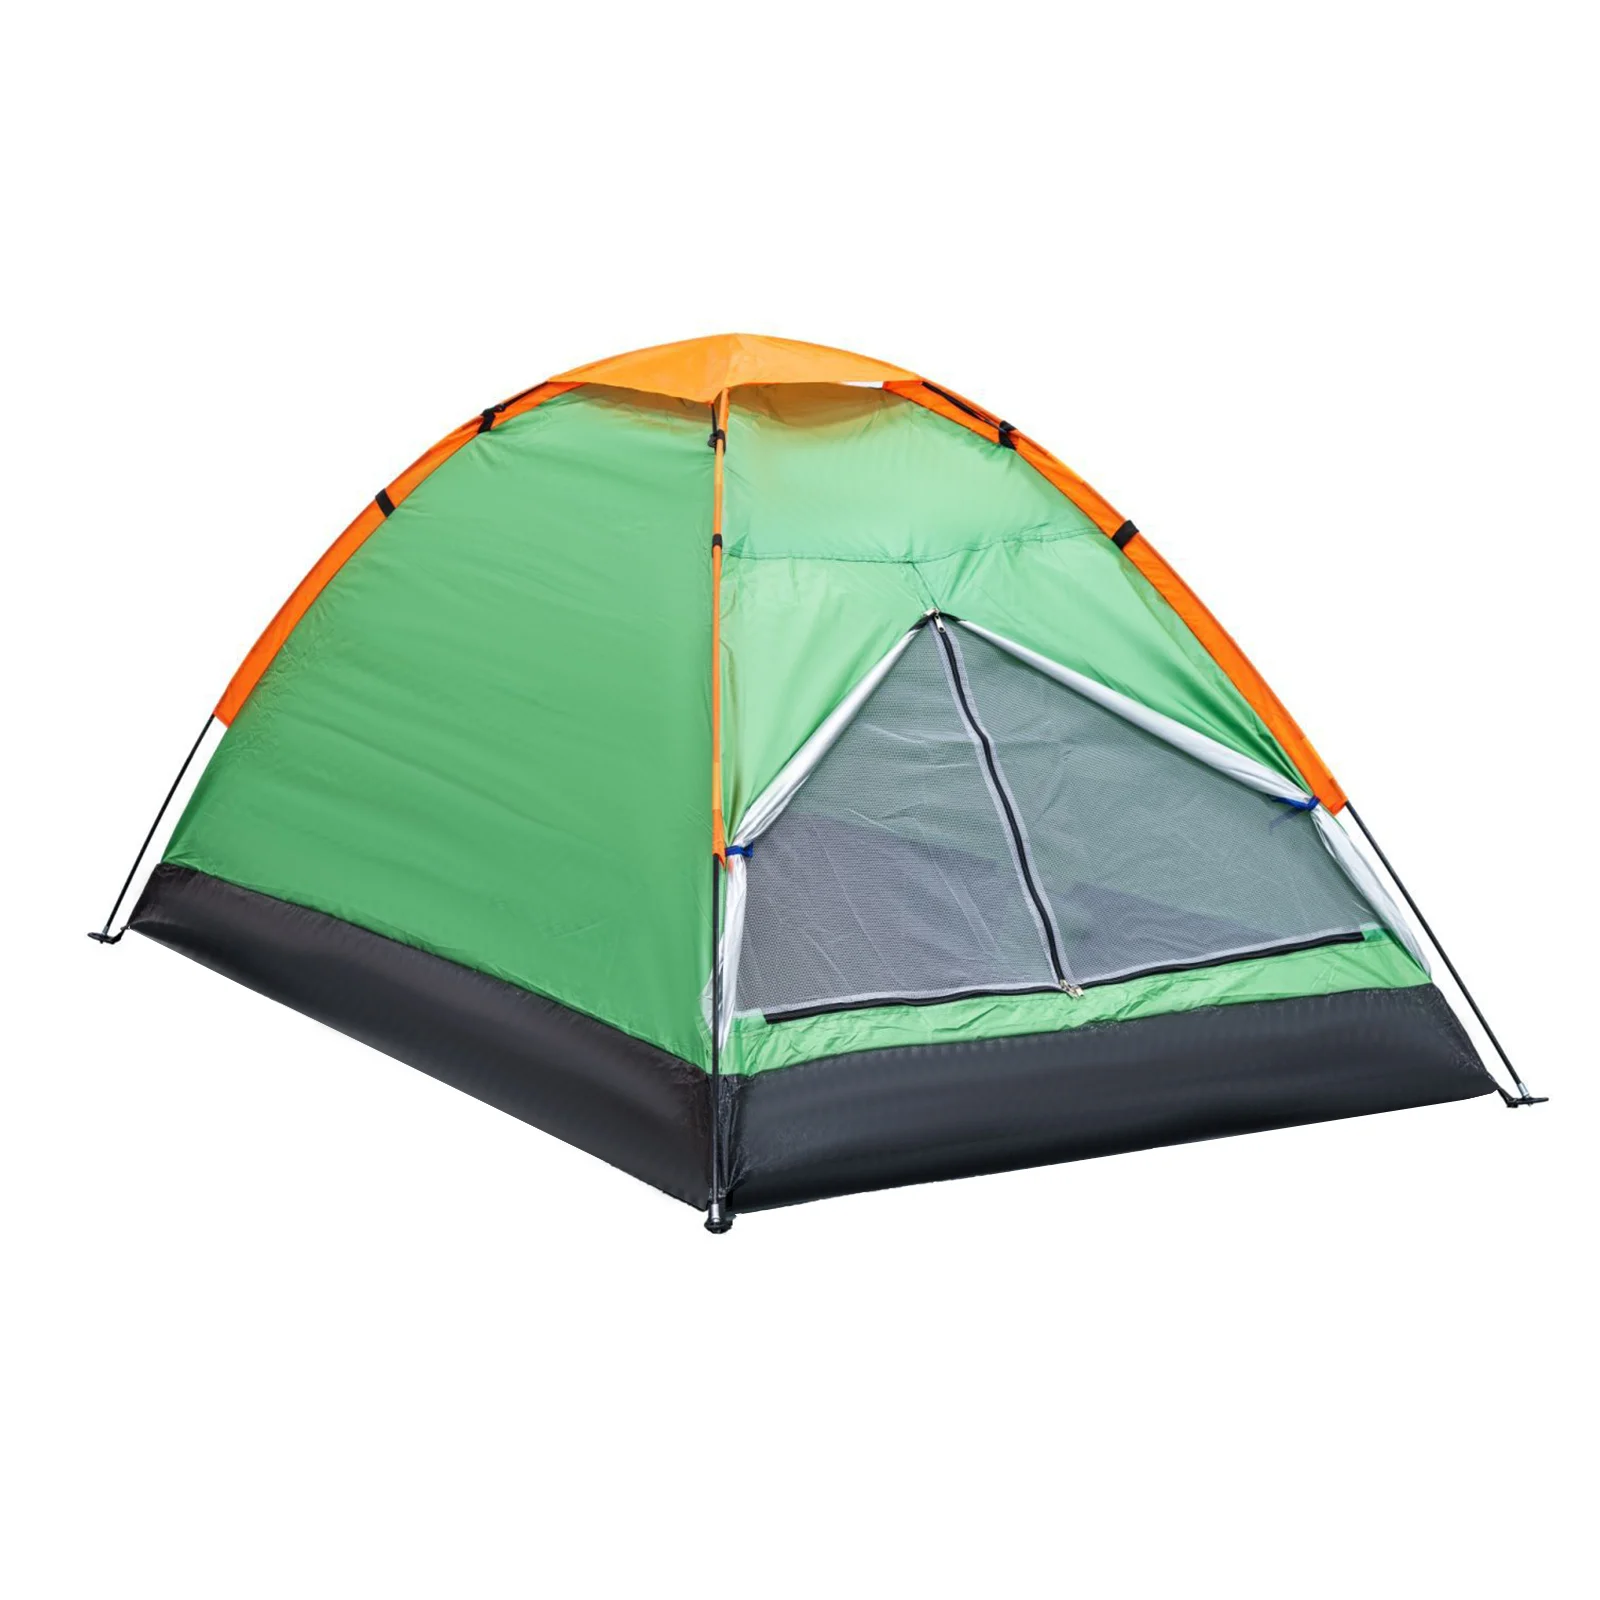 

Canopies Tent With Rain Fly Wakeman With Carrying Bag 190T Polyester Backpacking Compact Beach Hiking Lightweight